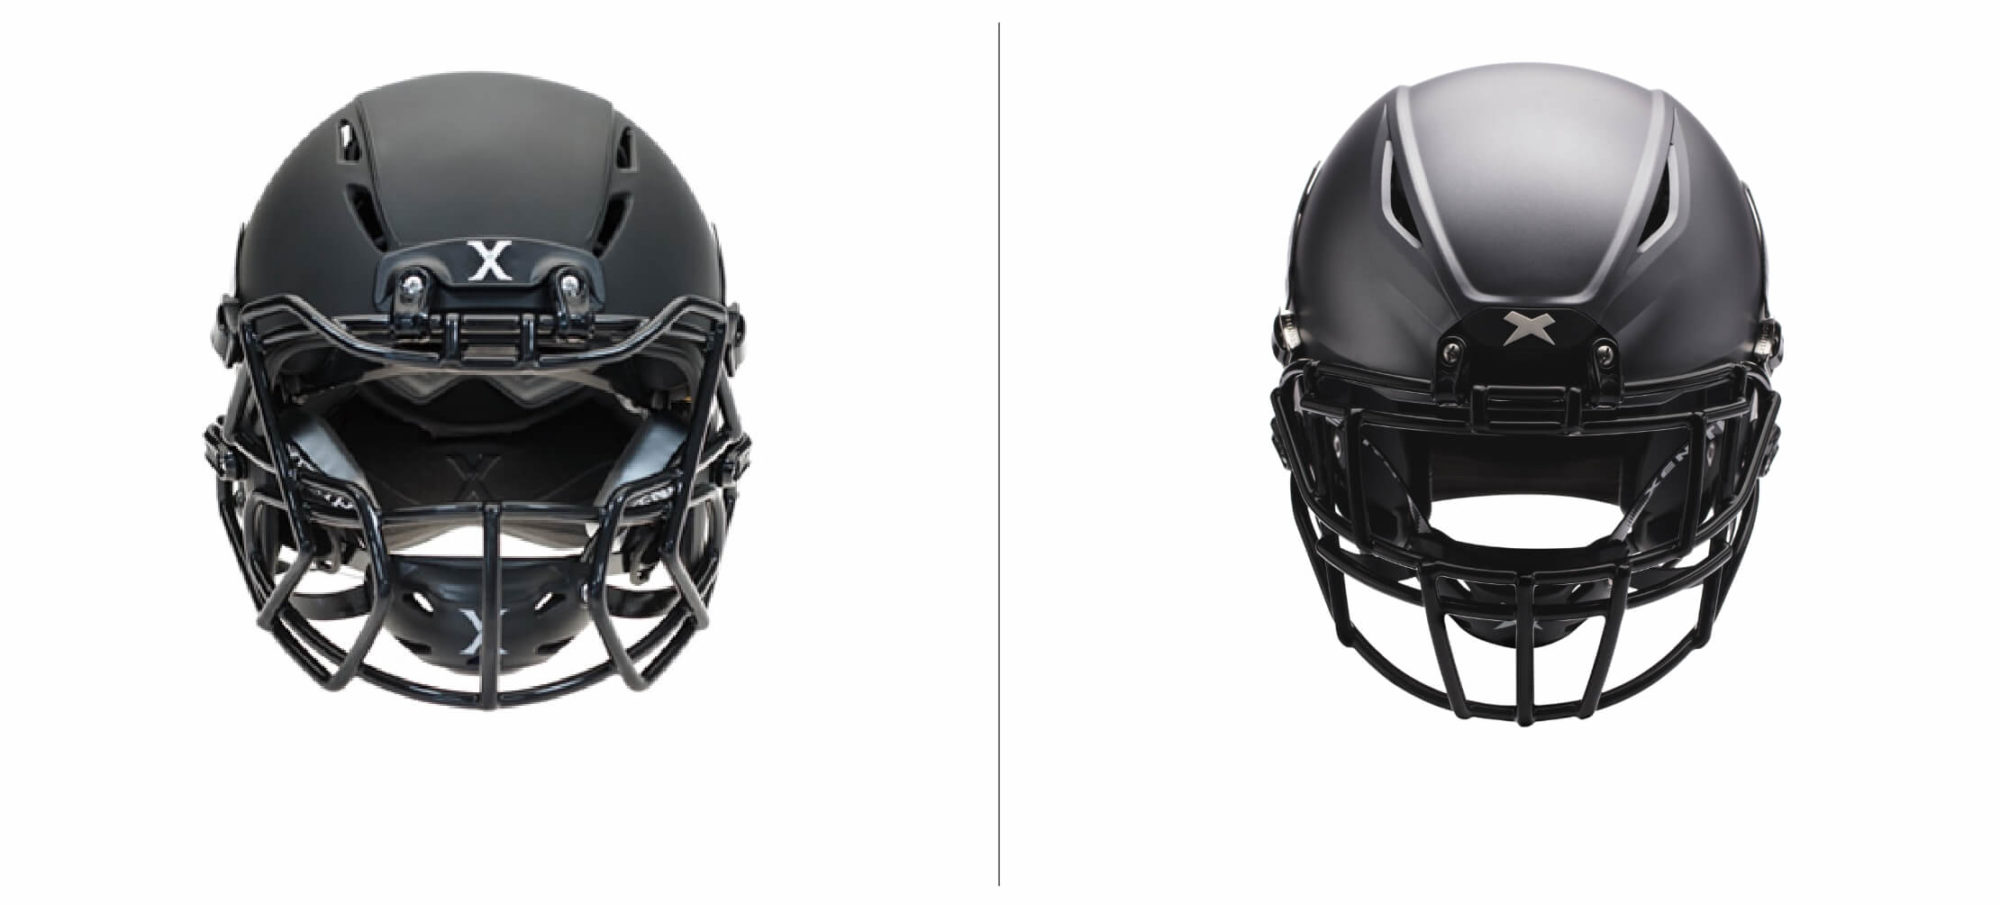 Xenith Logo on Helmet Before After